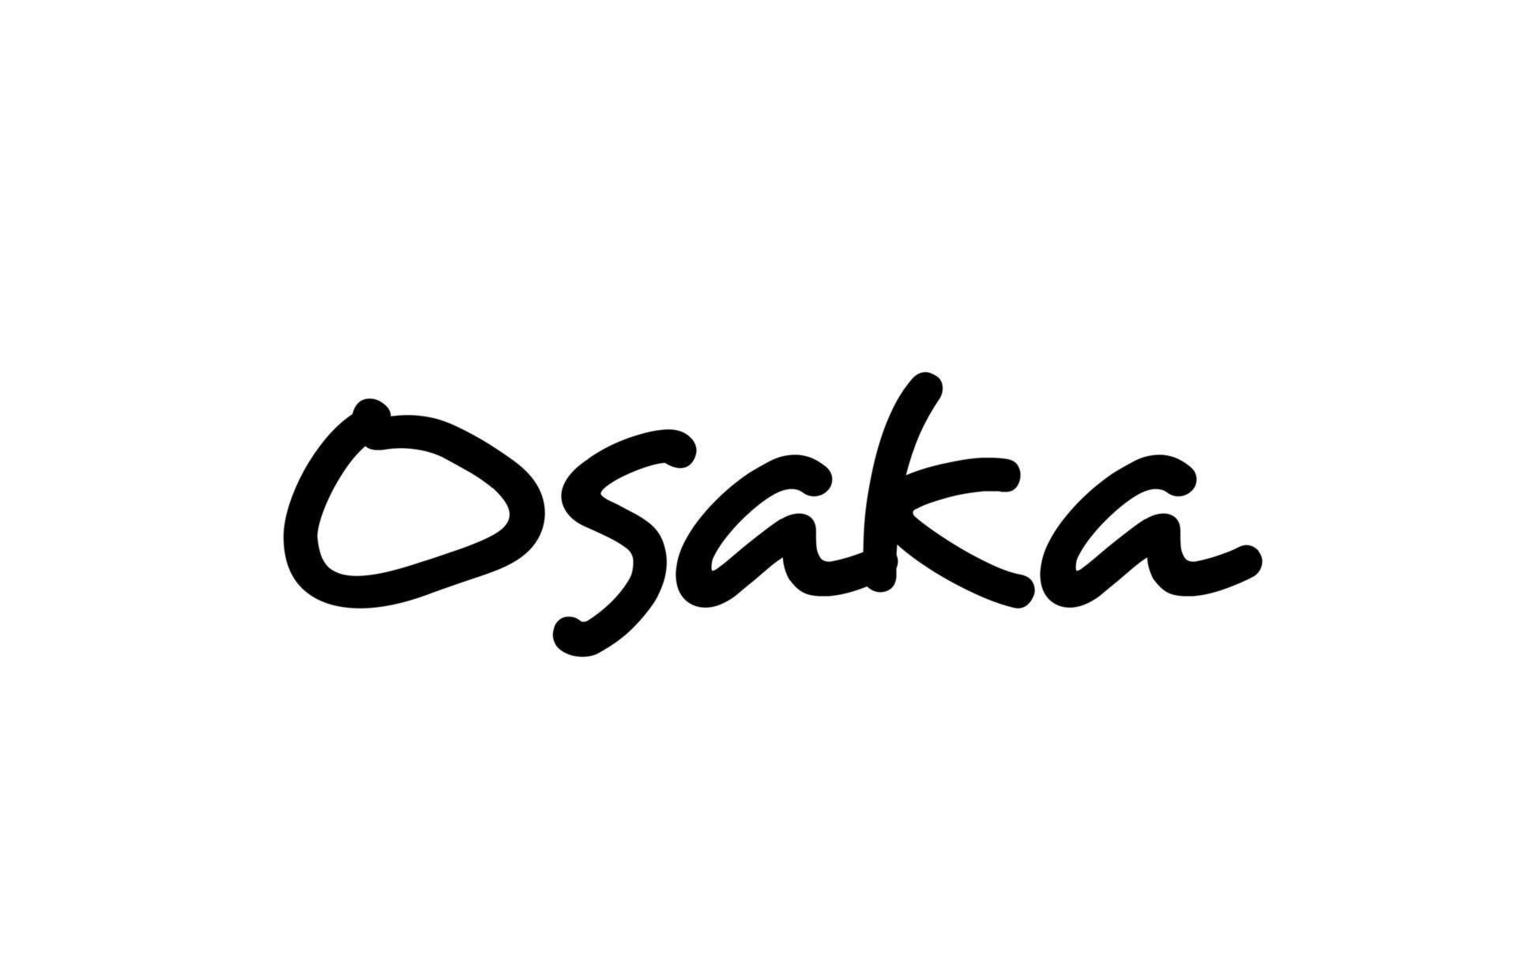 Osaka city handwritten word text hand lettering. Calligraphy text. Typography in black color vector